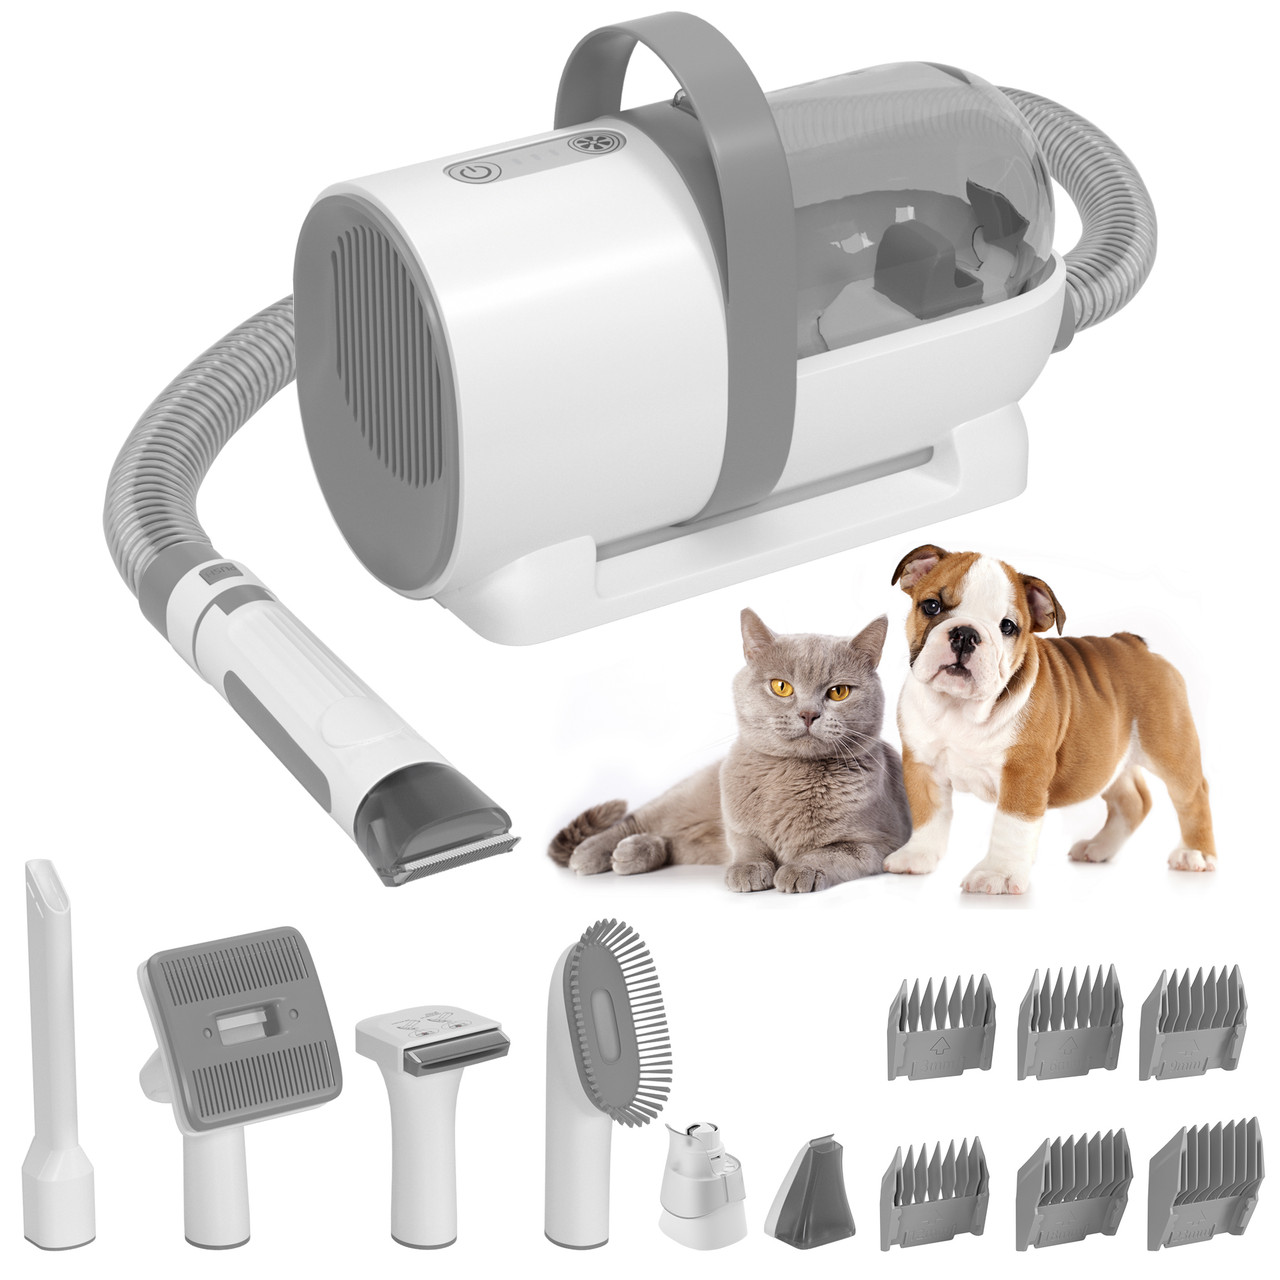 7 In 1 Pet Grooming Kit Vacuum Suction Professional Pet Hair Clipper 1.5L Grooming Tools for Dogs Cats PetsDog Vacuum Brush for Shedding Grooming